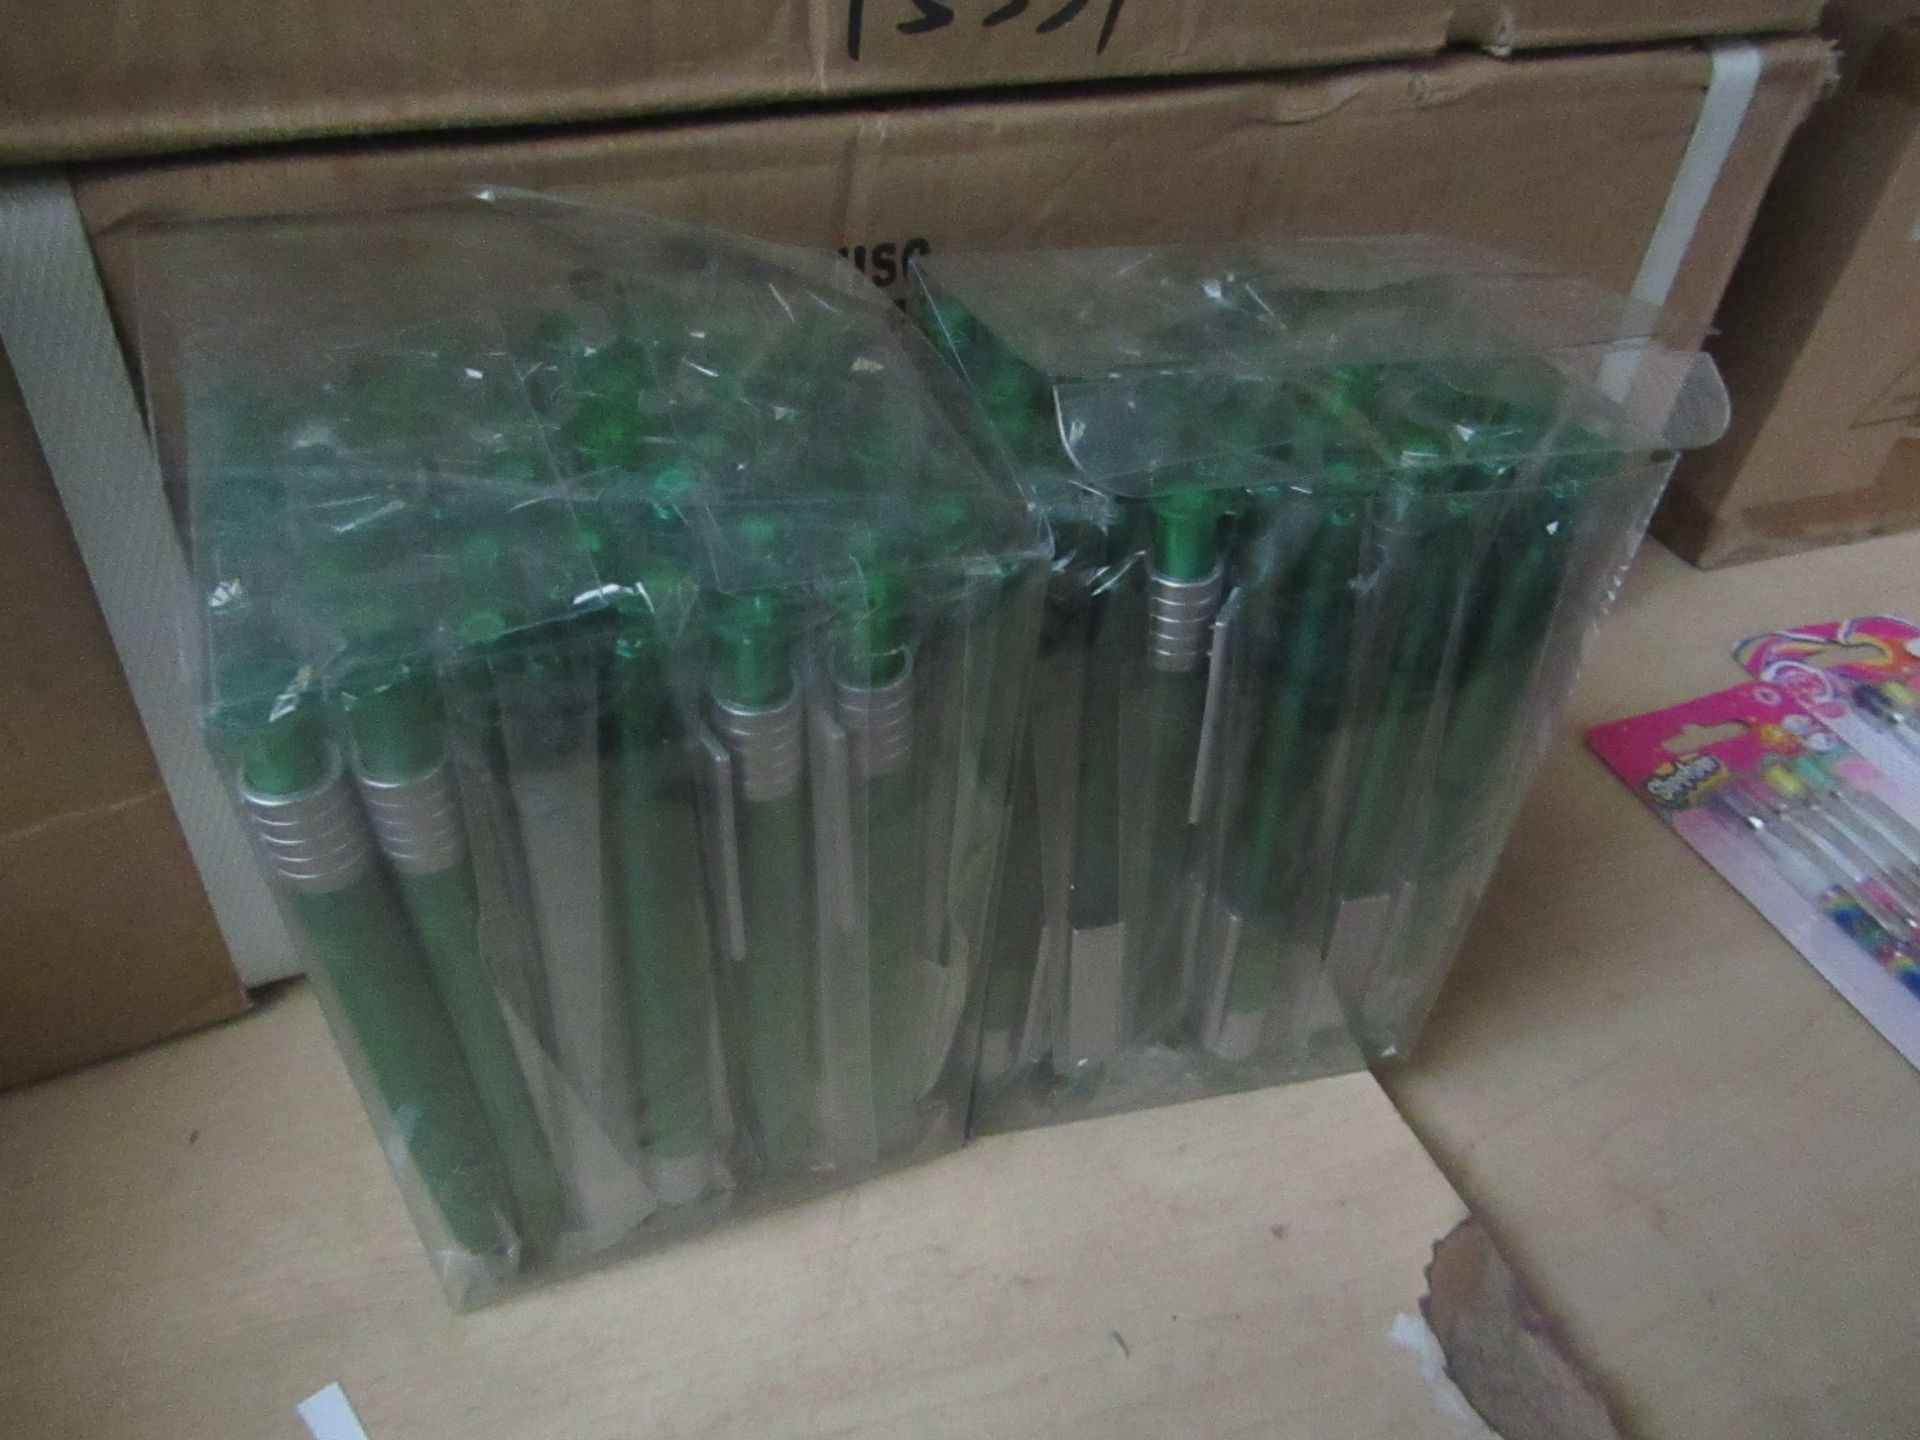 2 x packs of 50 Ball Point Pens new & packaged